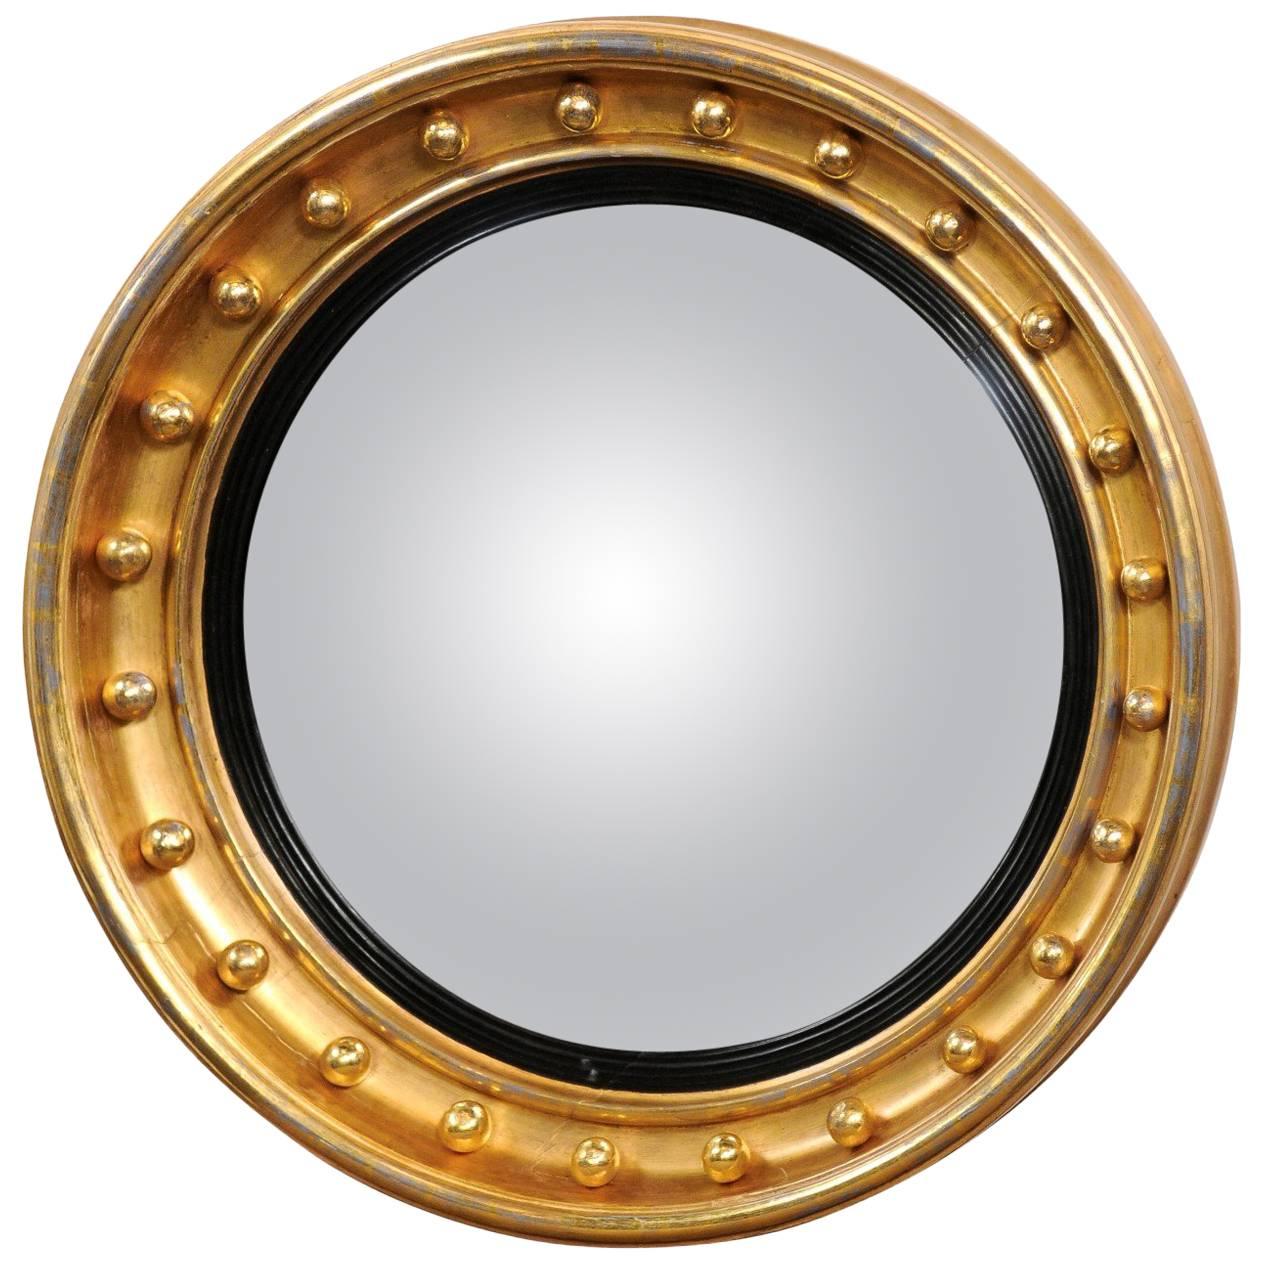 English Giltwood Girandole Mirror with Convex Mirror from the Mid-19th Century